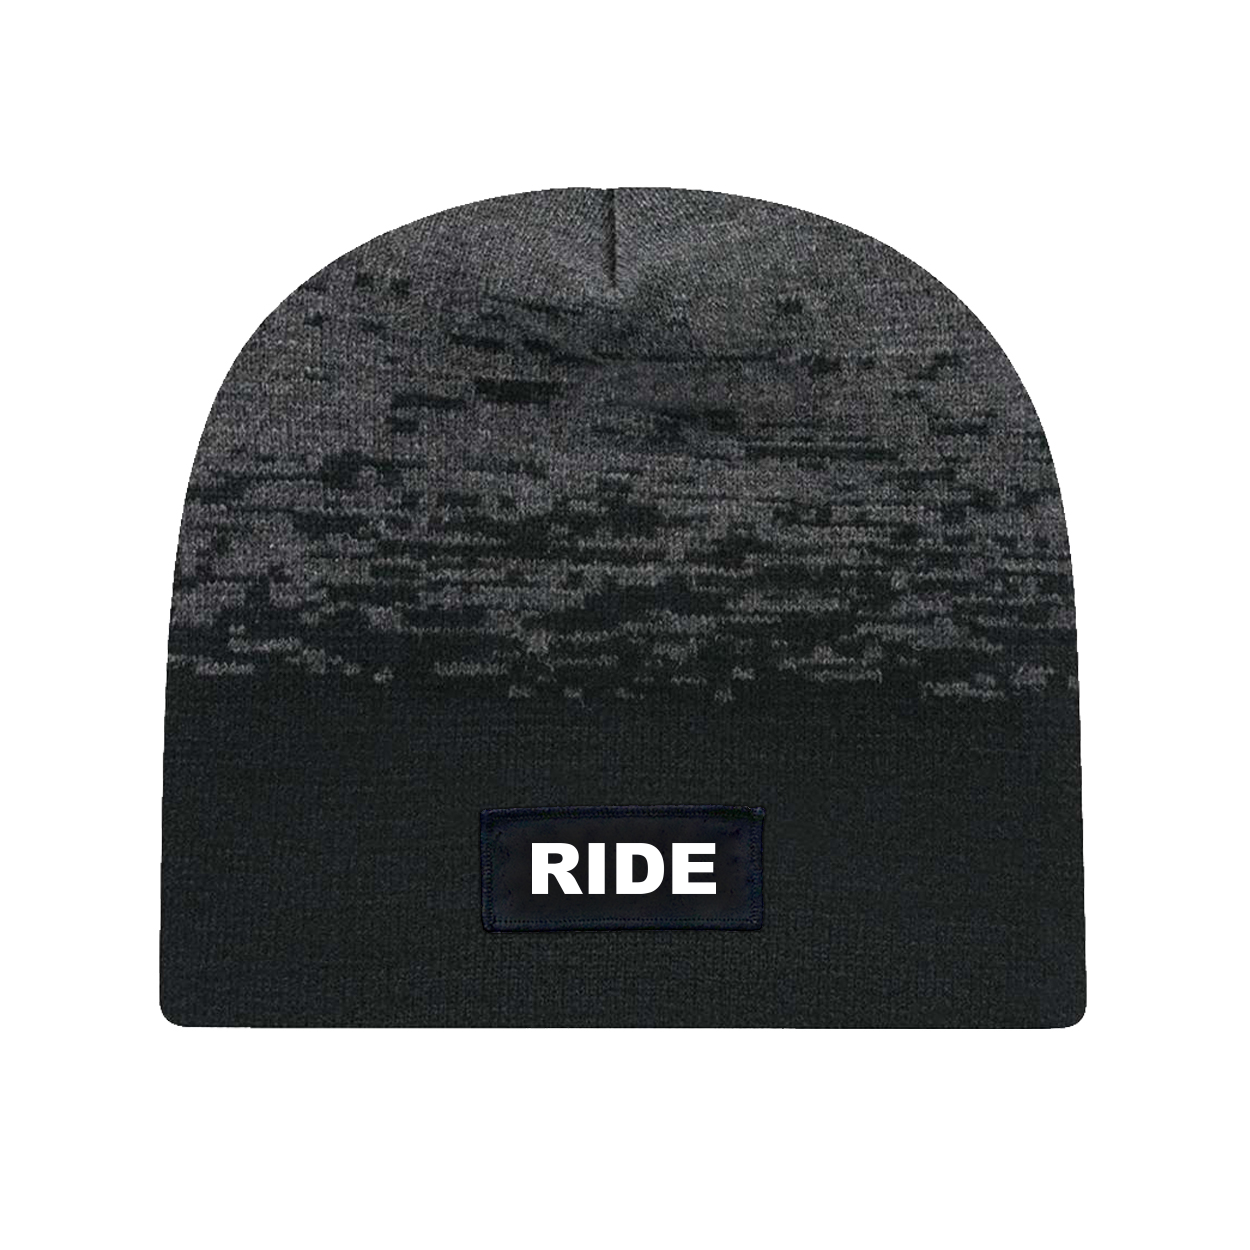 Ride Brand Logo Night Out Woven Patch Marled Knit Skully Beanie Black/ Dark Heather Grey